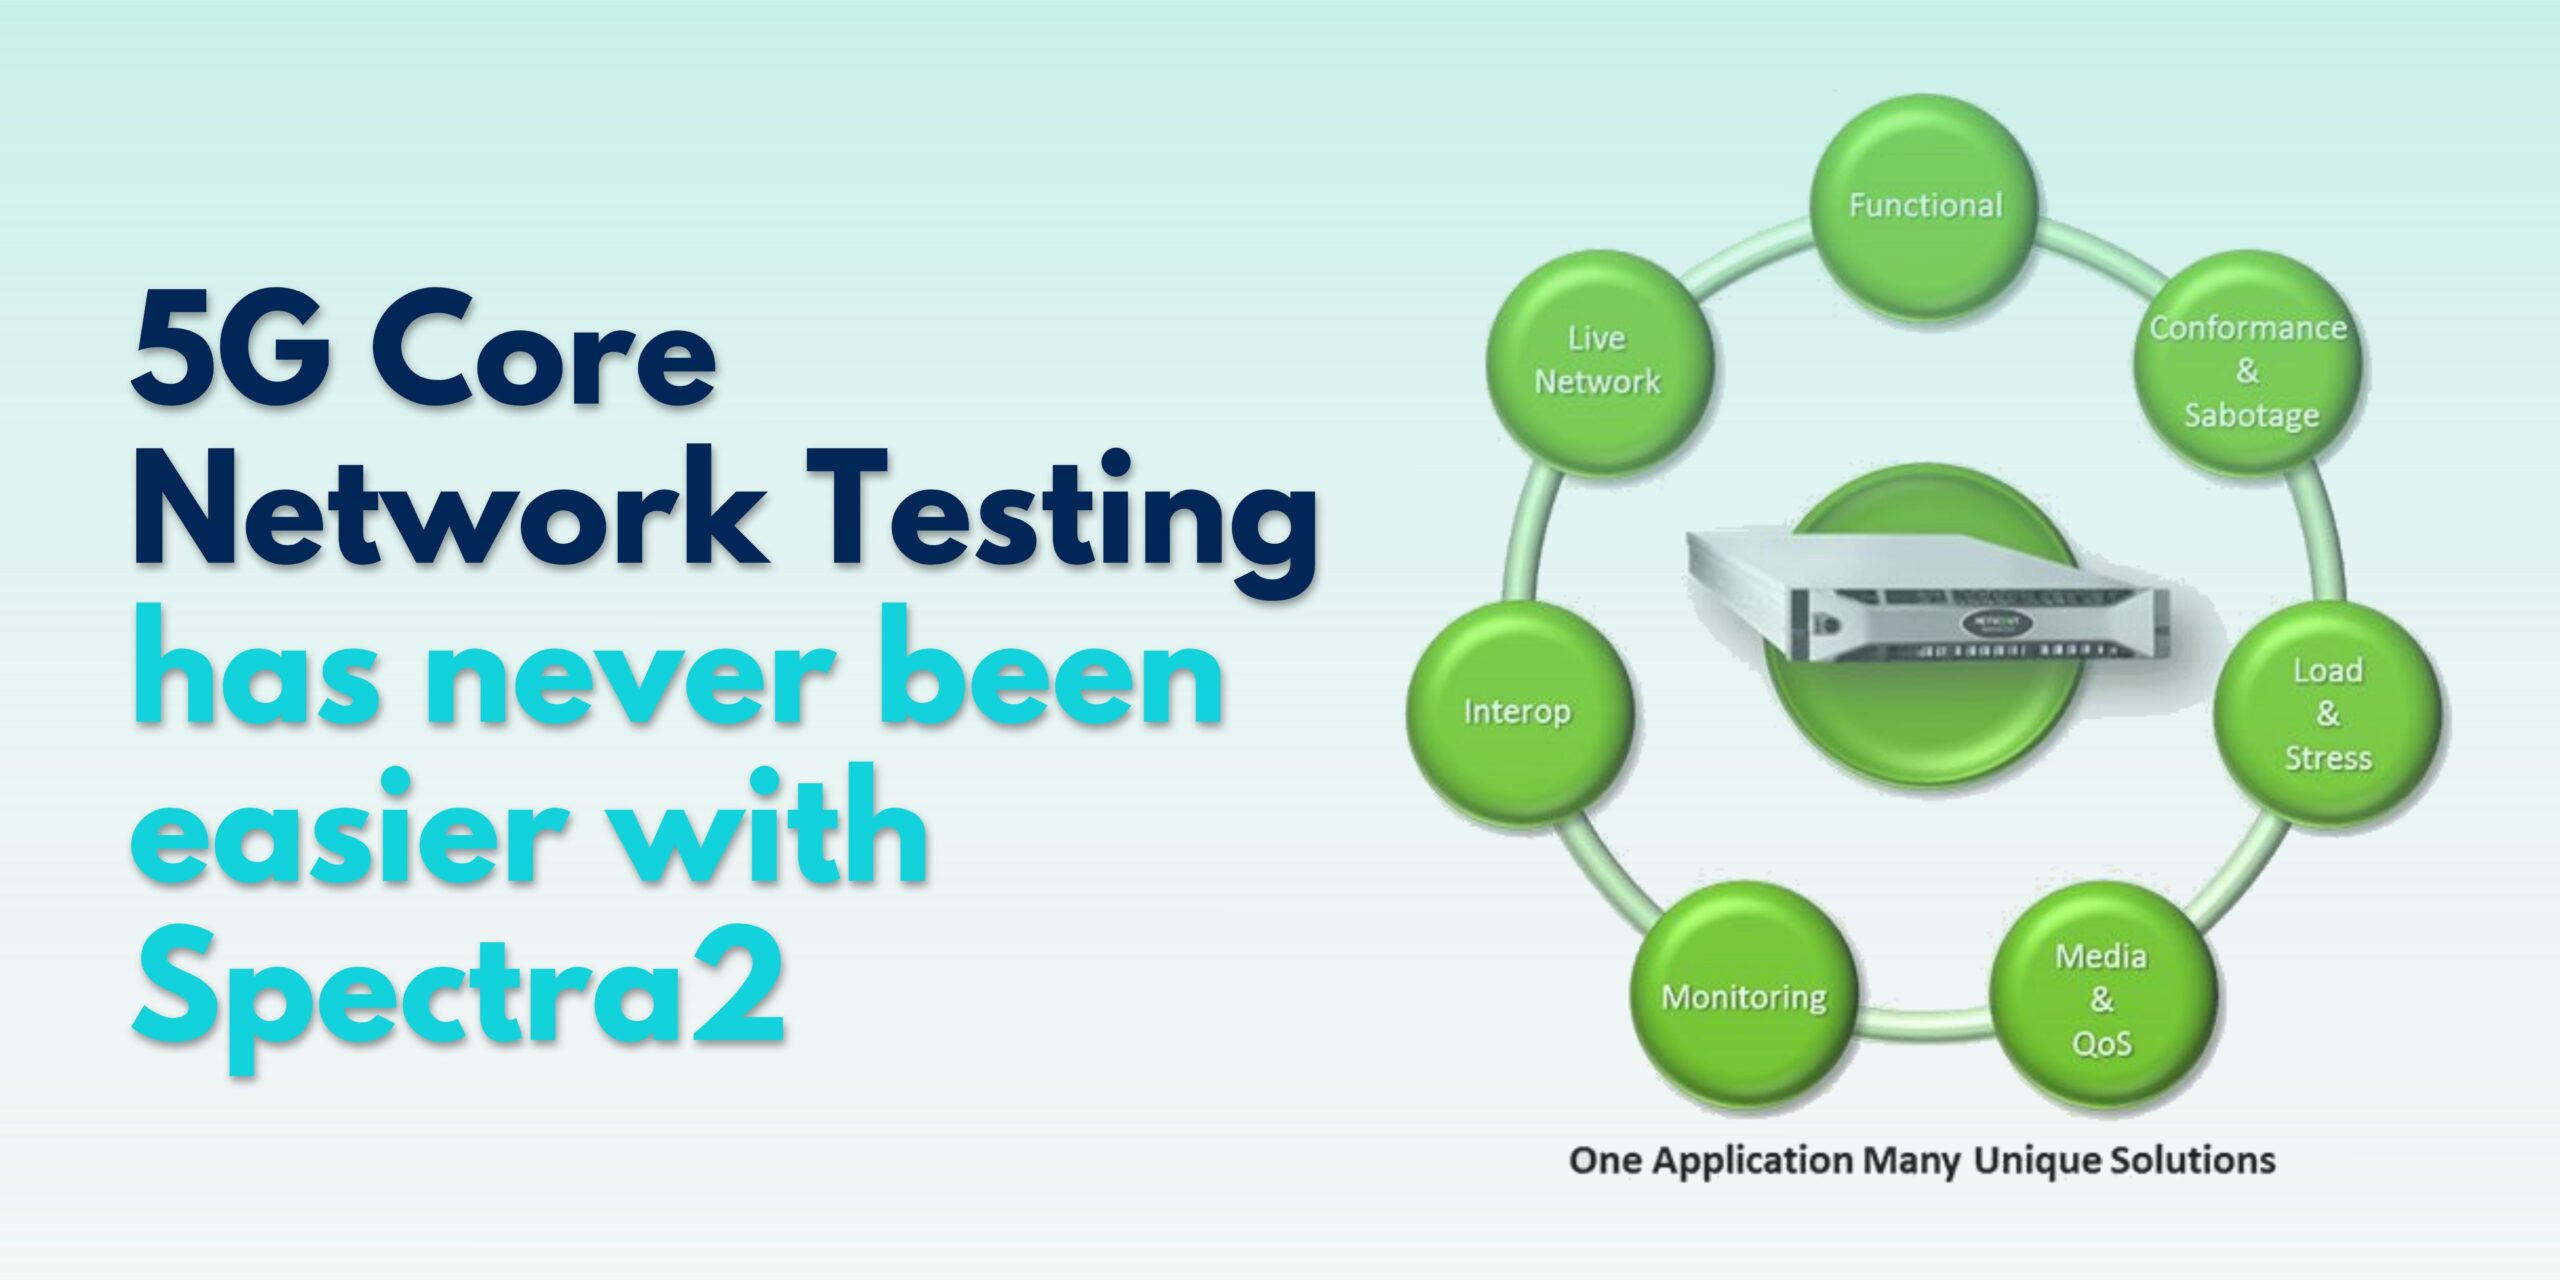 5G Core Network Testing has never been easier with Spectra2